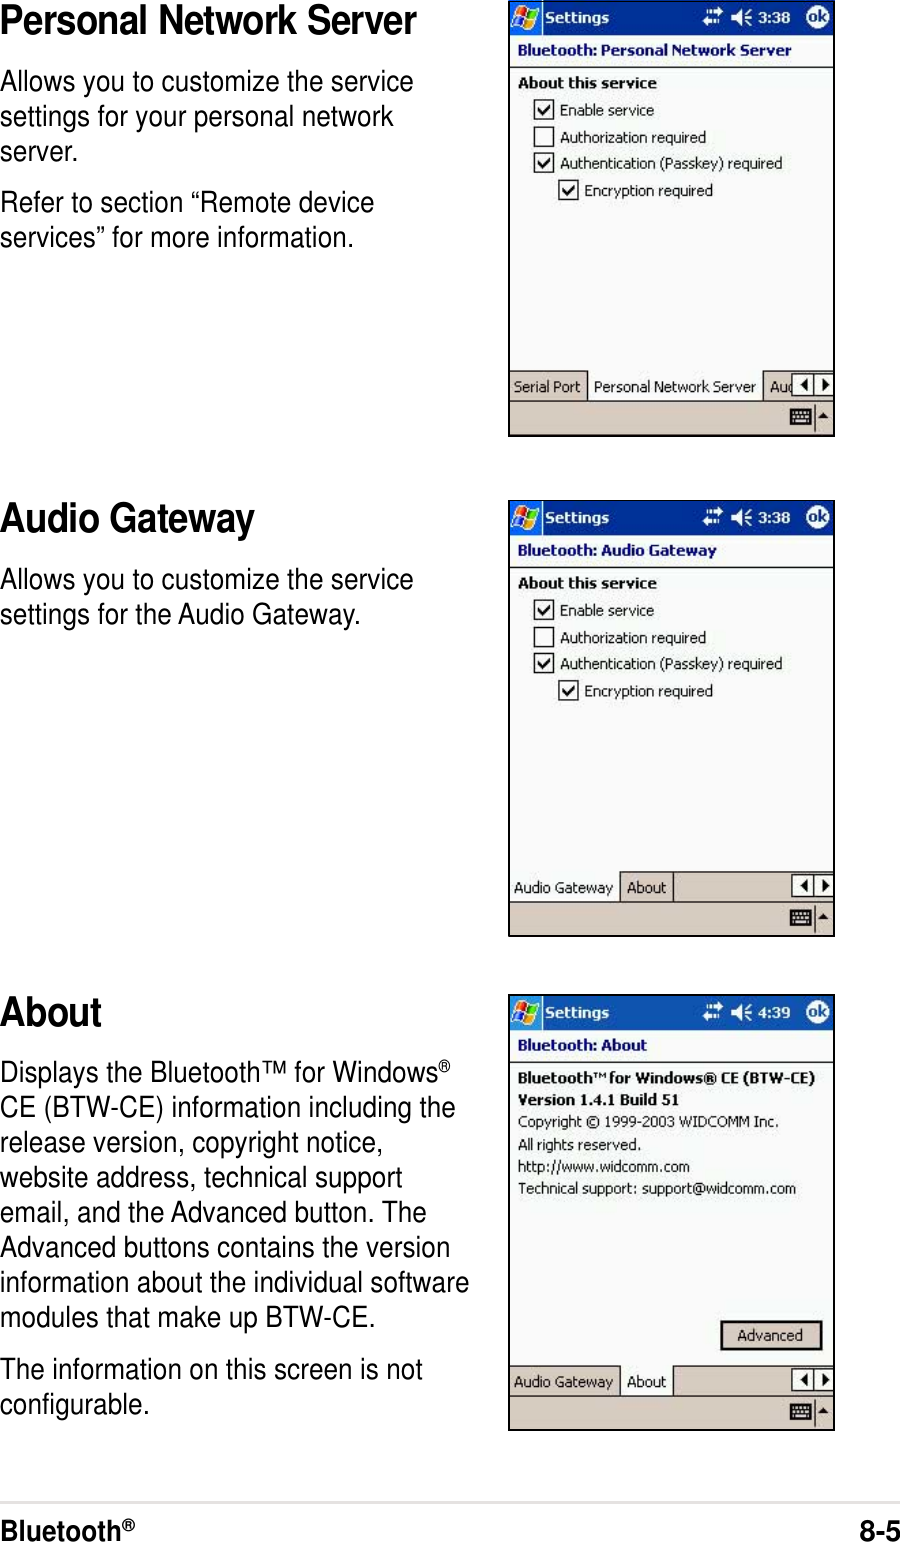 Bluetooth®8-5Personal Network ServerAllows you to customize the servicesettings for your personal networkserver.Refer to section “Remote deviceservices” for more information.Audio GatewayAllows you to customize the servicesettings for the Audio Gateway.AboutDisplays the Bluetooth™ for Windows®CE (BTW-CE) information including therelease version, copyright notice,website address, technical supportemail, and the Advanced button. TheAdvanced buttons contains the versioninformation about the individual softwaremodules that make up BTW-CE.The information on this screen is notconfigurable.